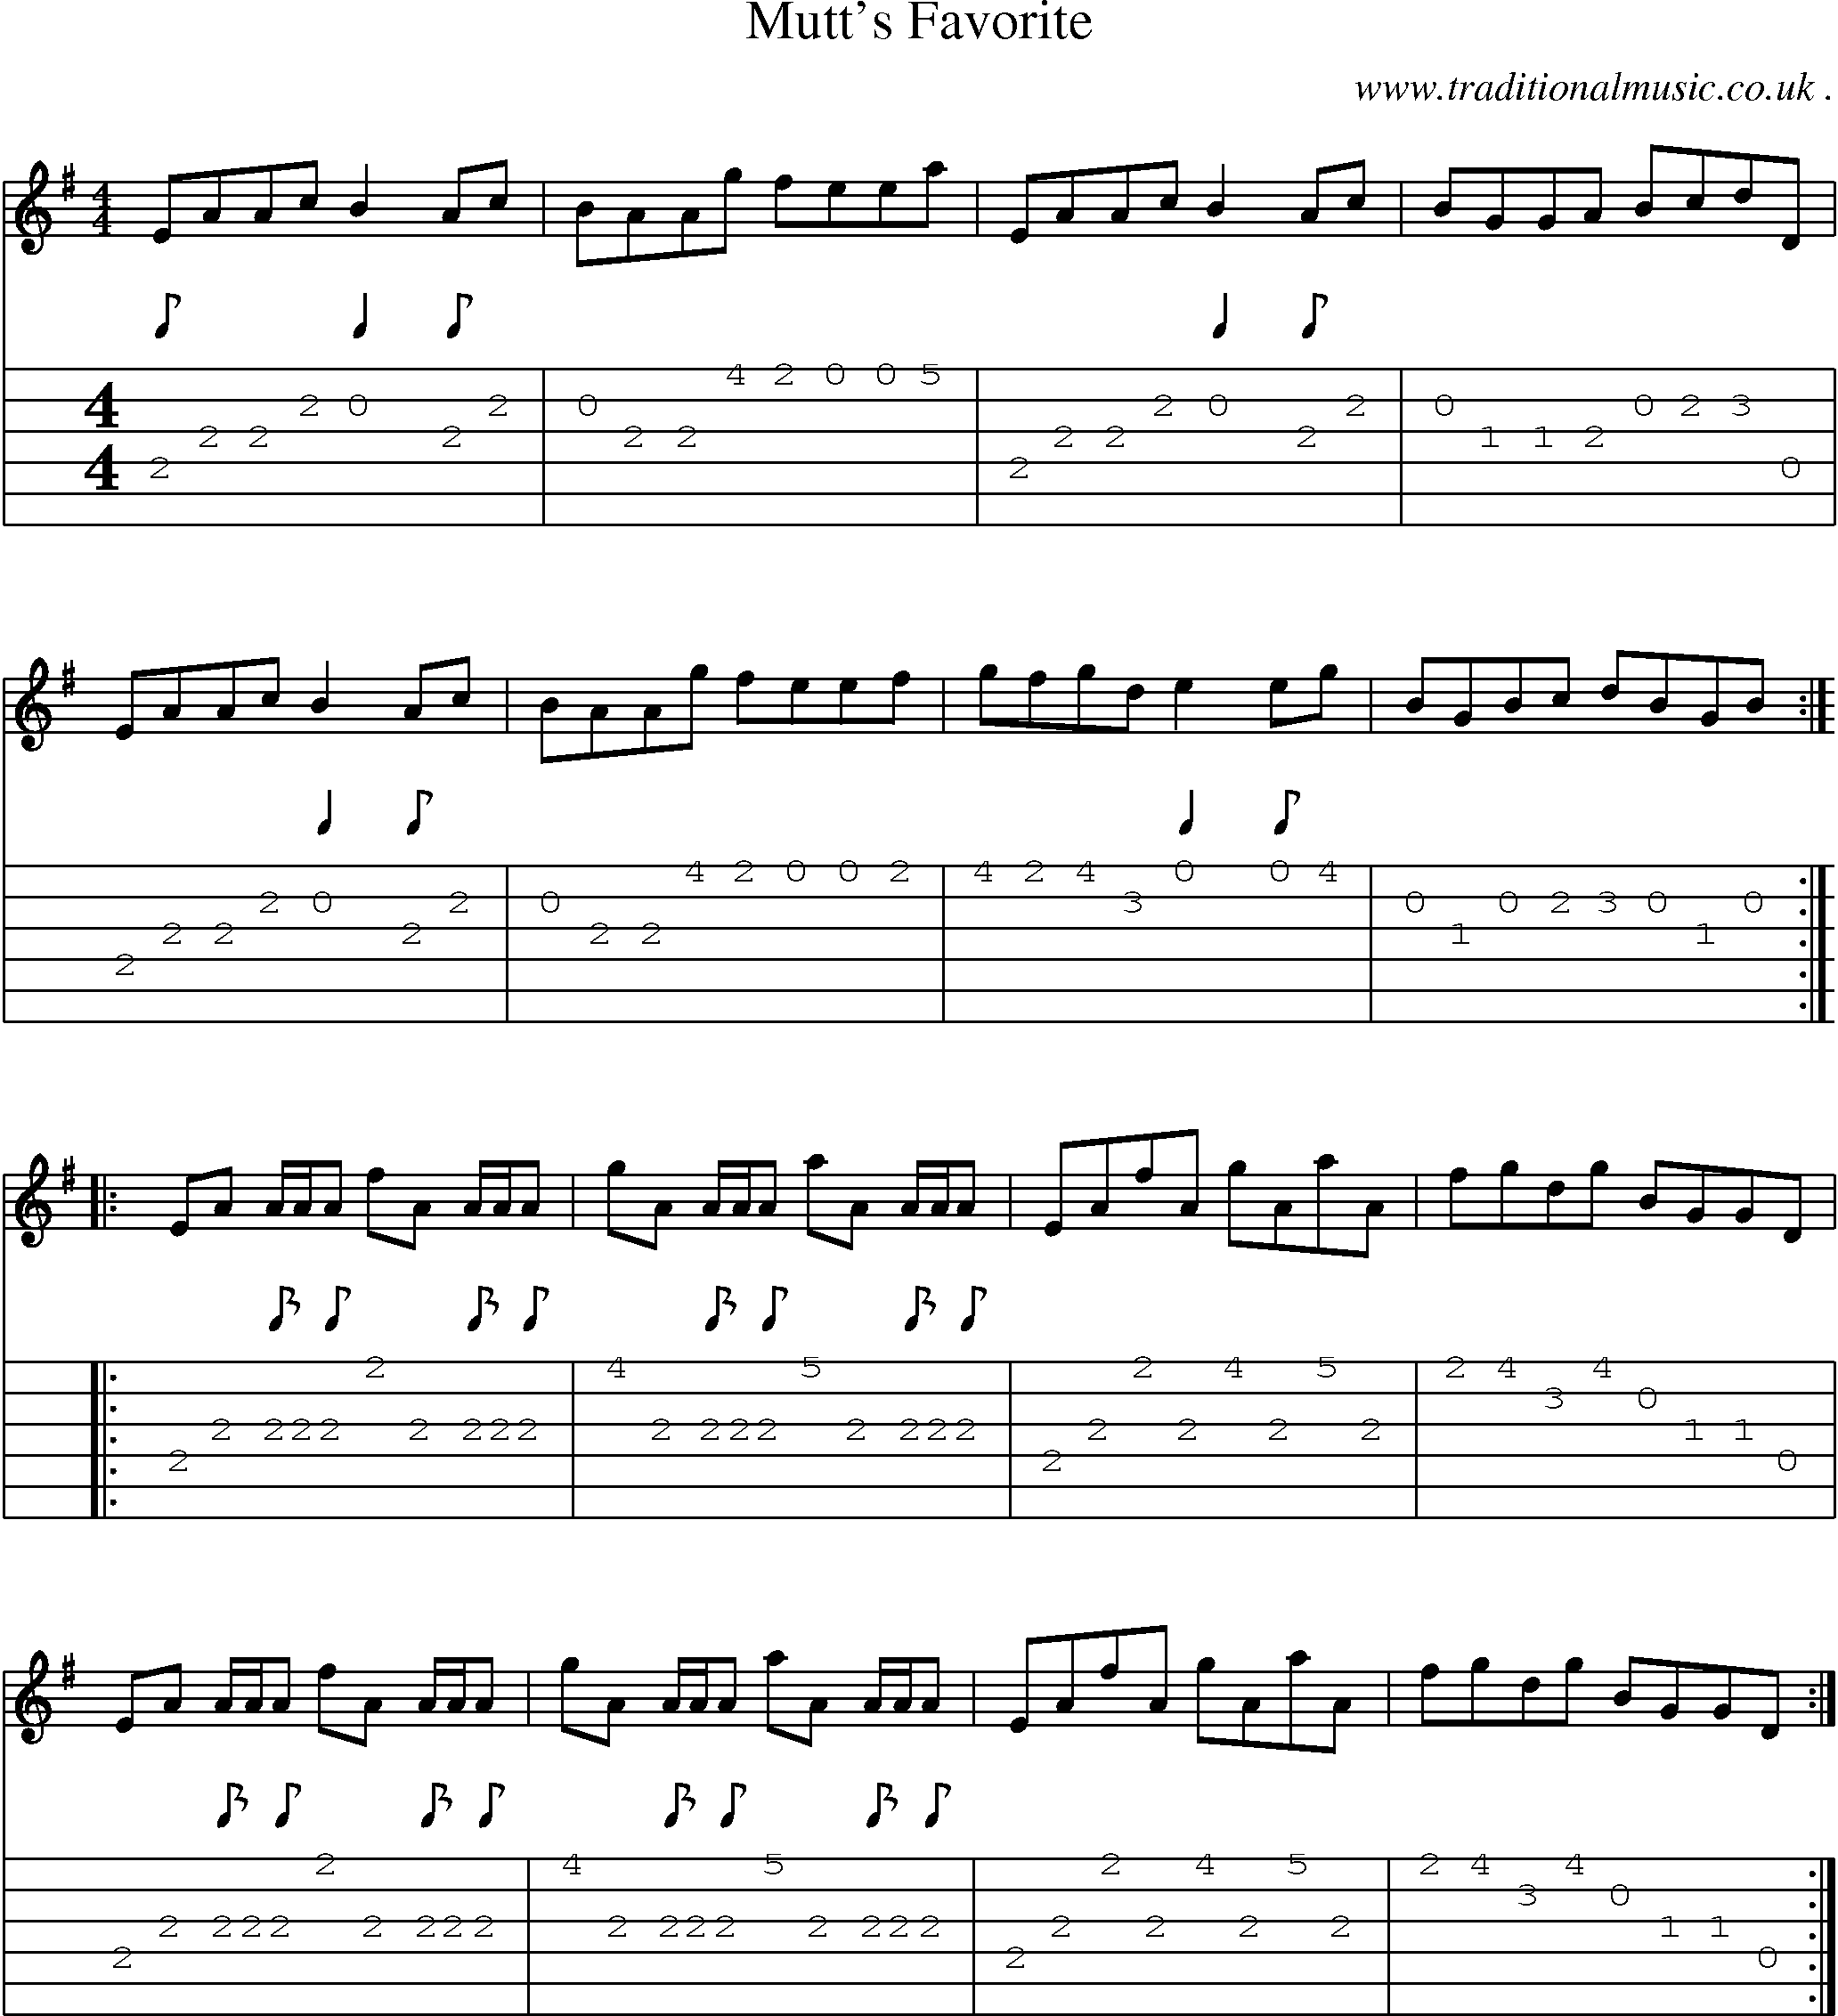 Sheet-Music and Guitar Tabs for Mutts Favorite